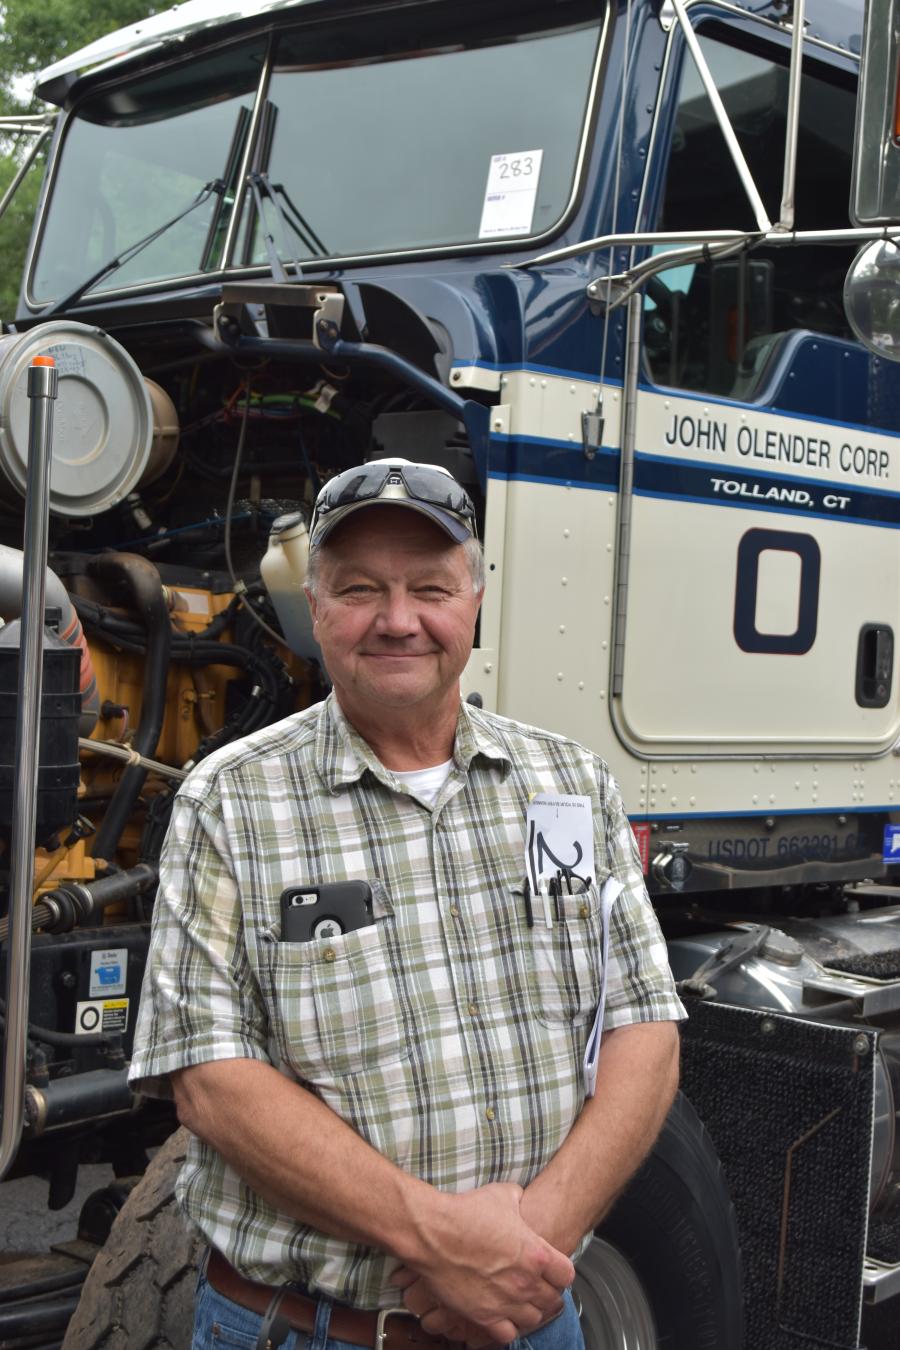 Nate Mix of Mix Brothers in Freeville, N.Y., was really hoping to bring home one of these prime Kenworth T800 dumps.